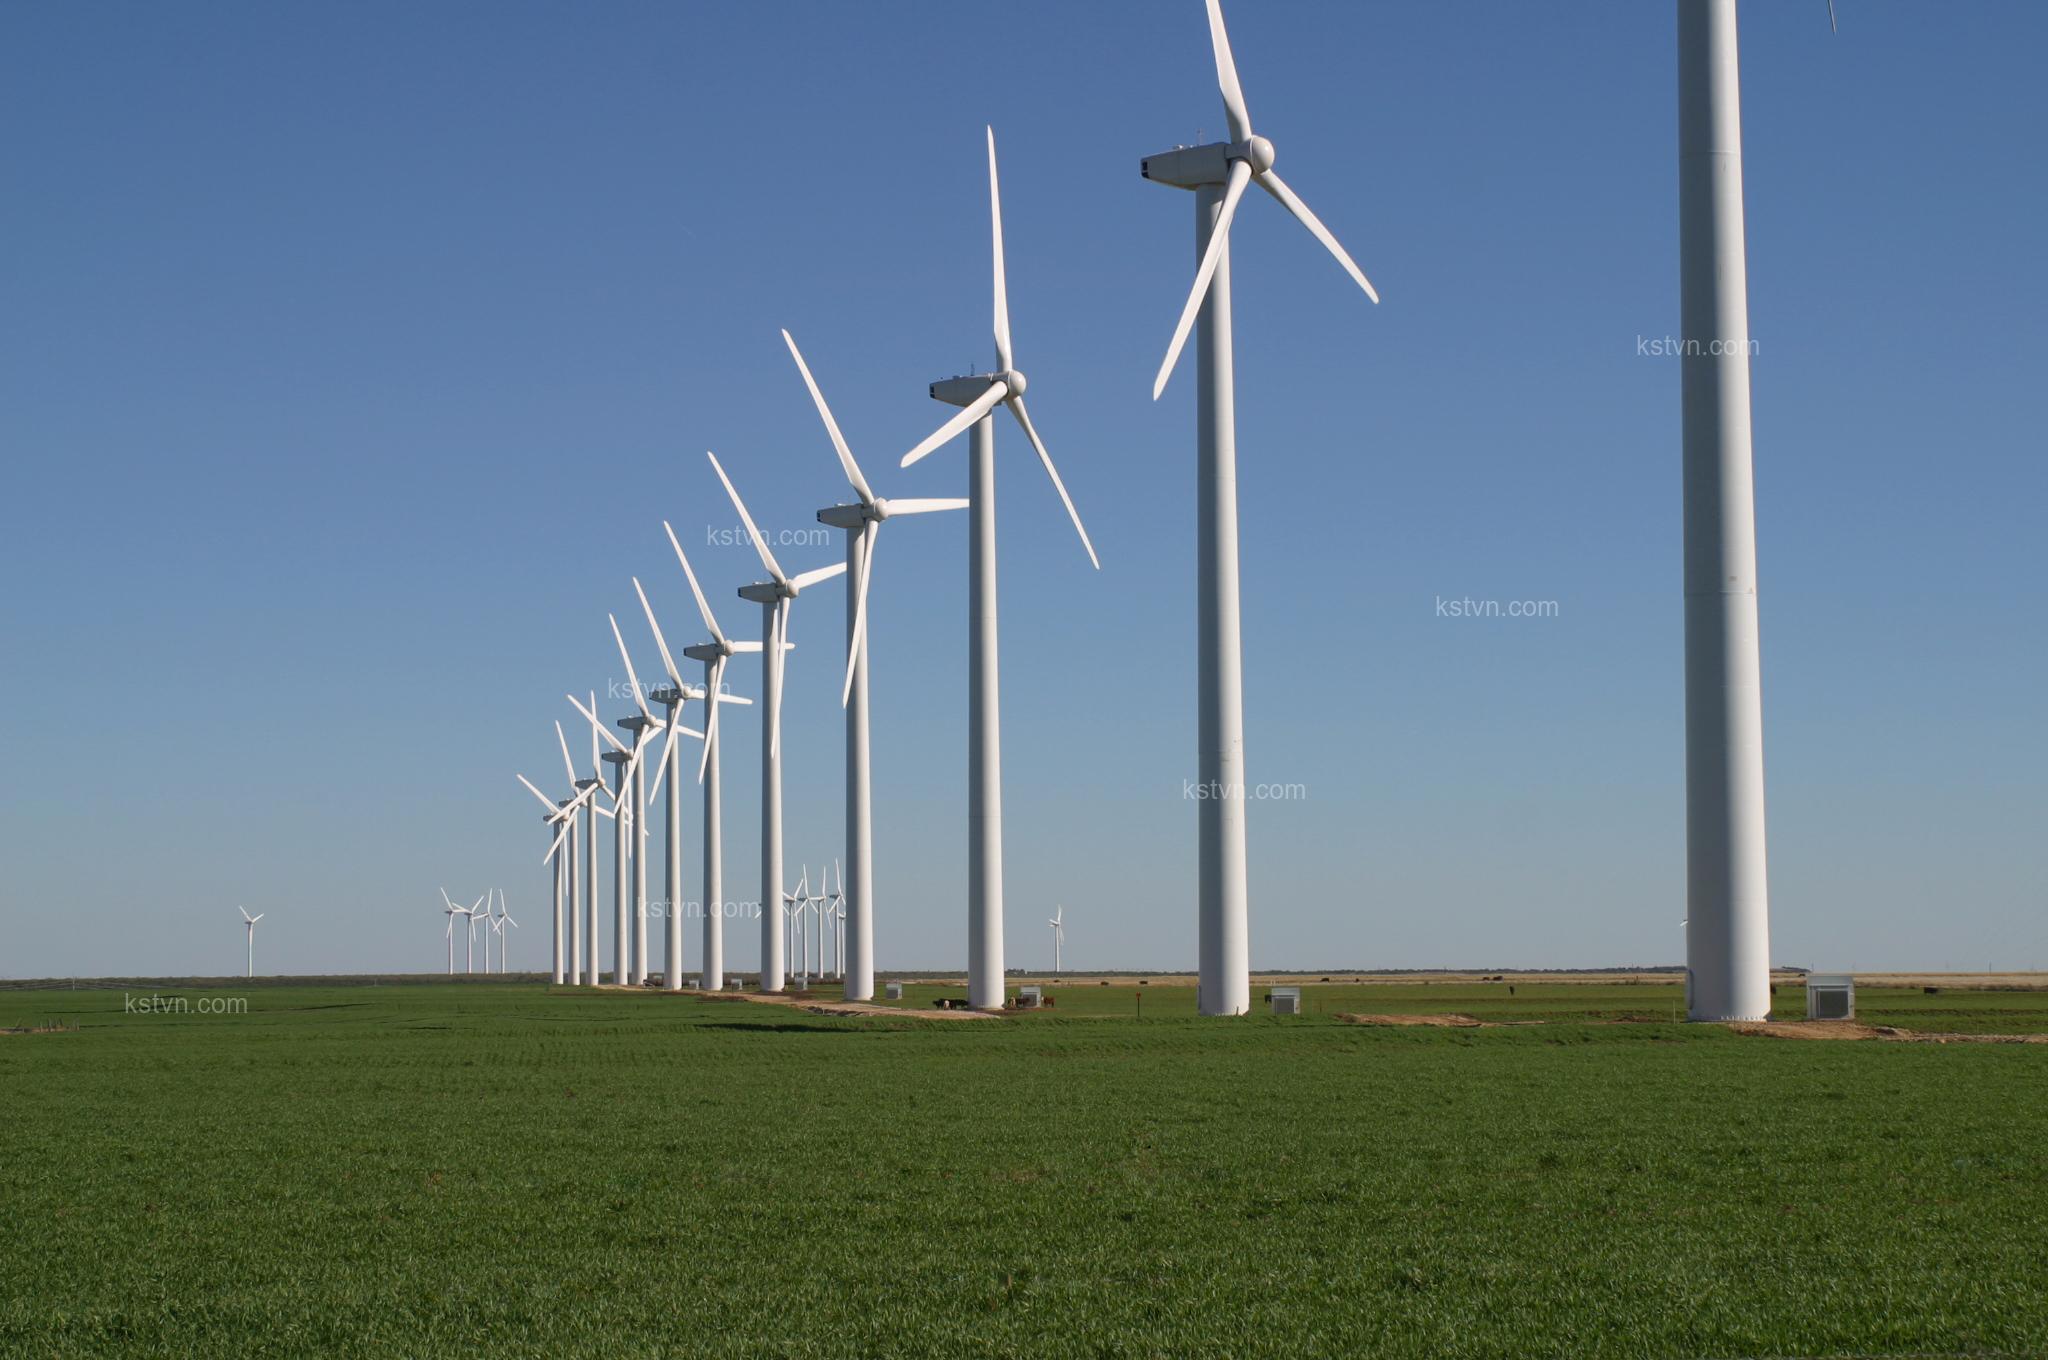 Wind energy is used to generate energy from the Earth